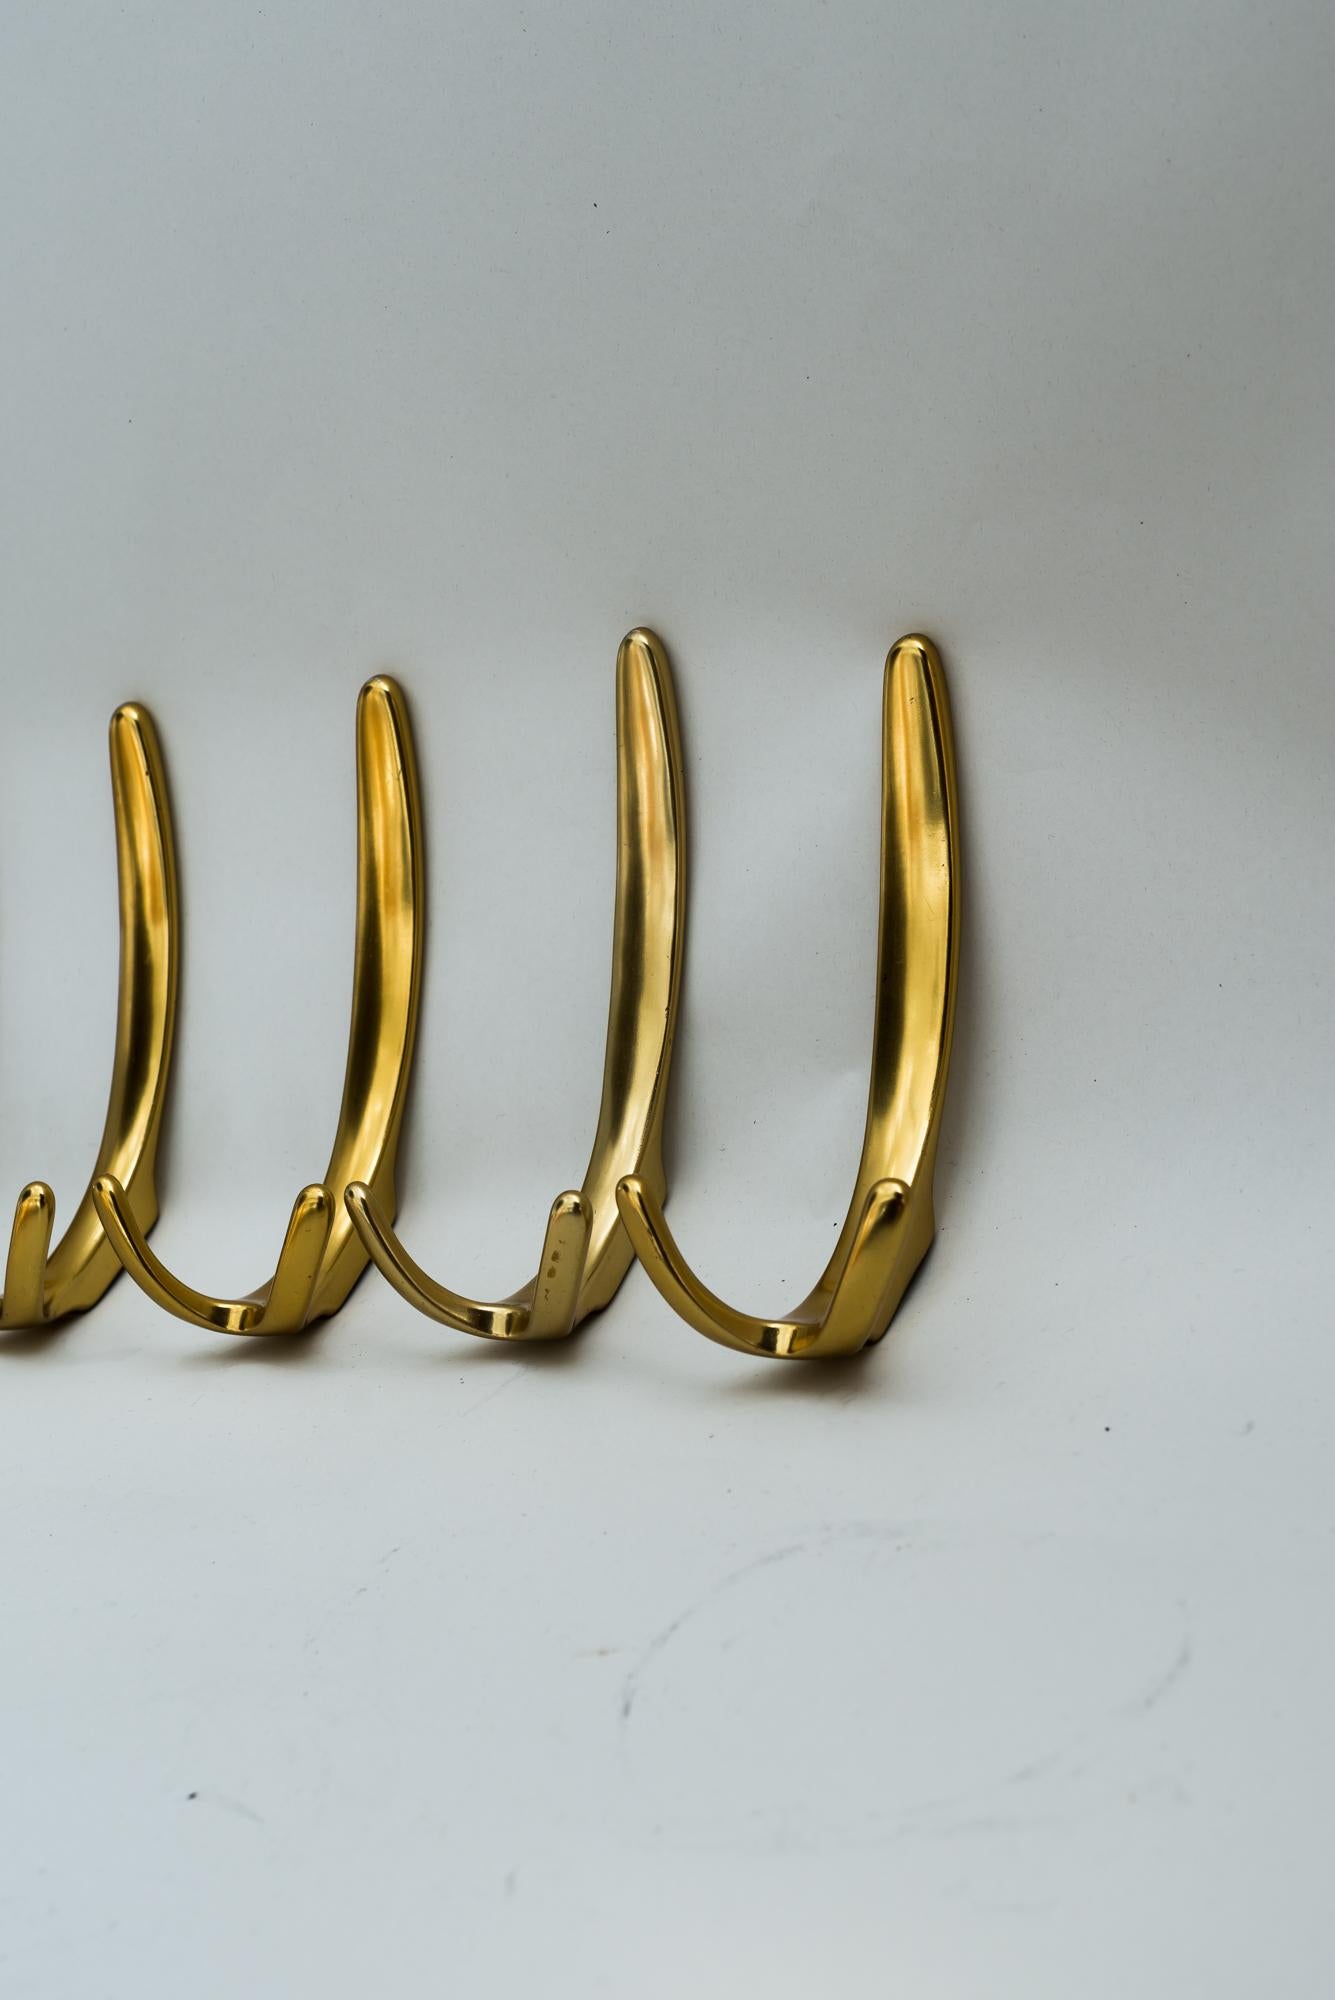 Aluminum wall hooks, Vienna, circa 1960s
It is not possible to attach on wall directly.
It can only be mounted on a wooden plate or metal plate and then attach the entire construction to the wall.
Good original condition.